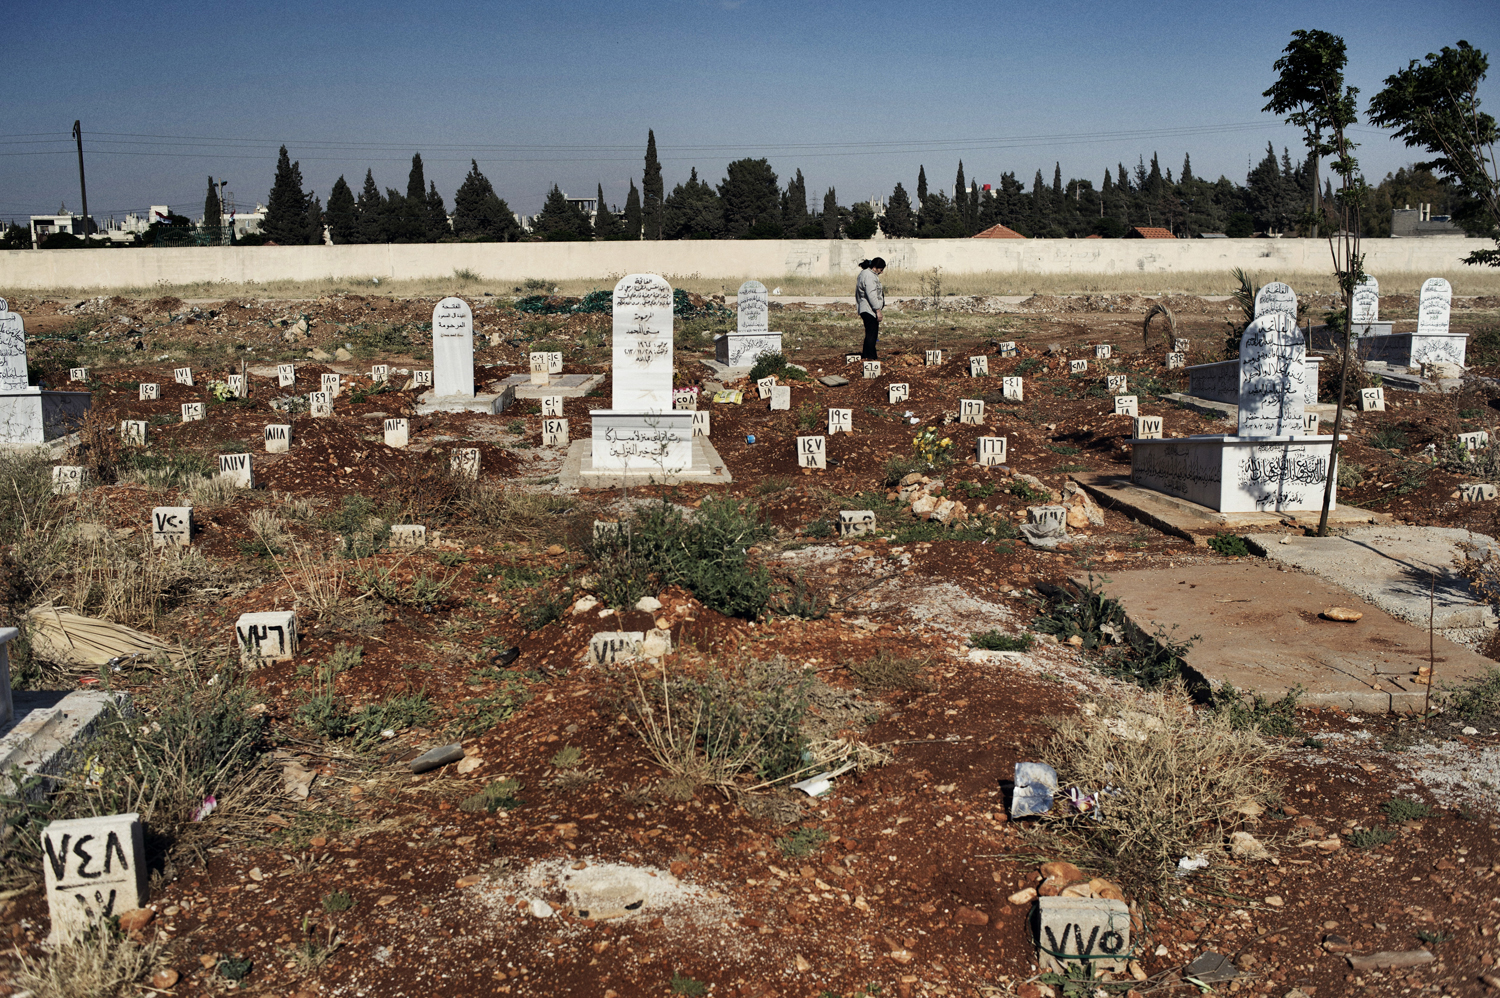 The Martyrs of Firdos Cemetery, Zahara neighborhood, Homs. Zahara is an Alawite neighborhood in Homs, where 4000 soldiers that died fighting for the government of Assad are buried in a special cemetery. Homs, May 13, 2014.